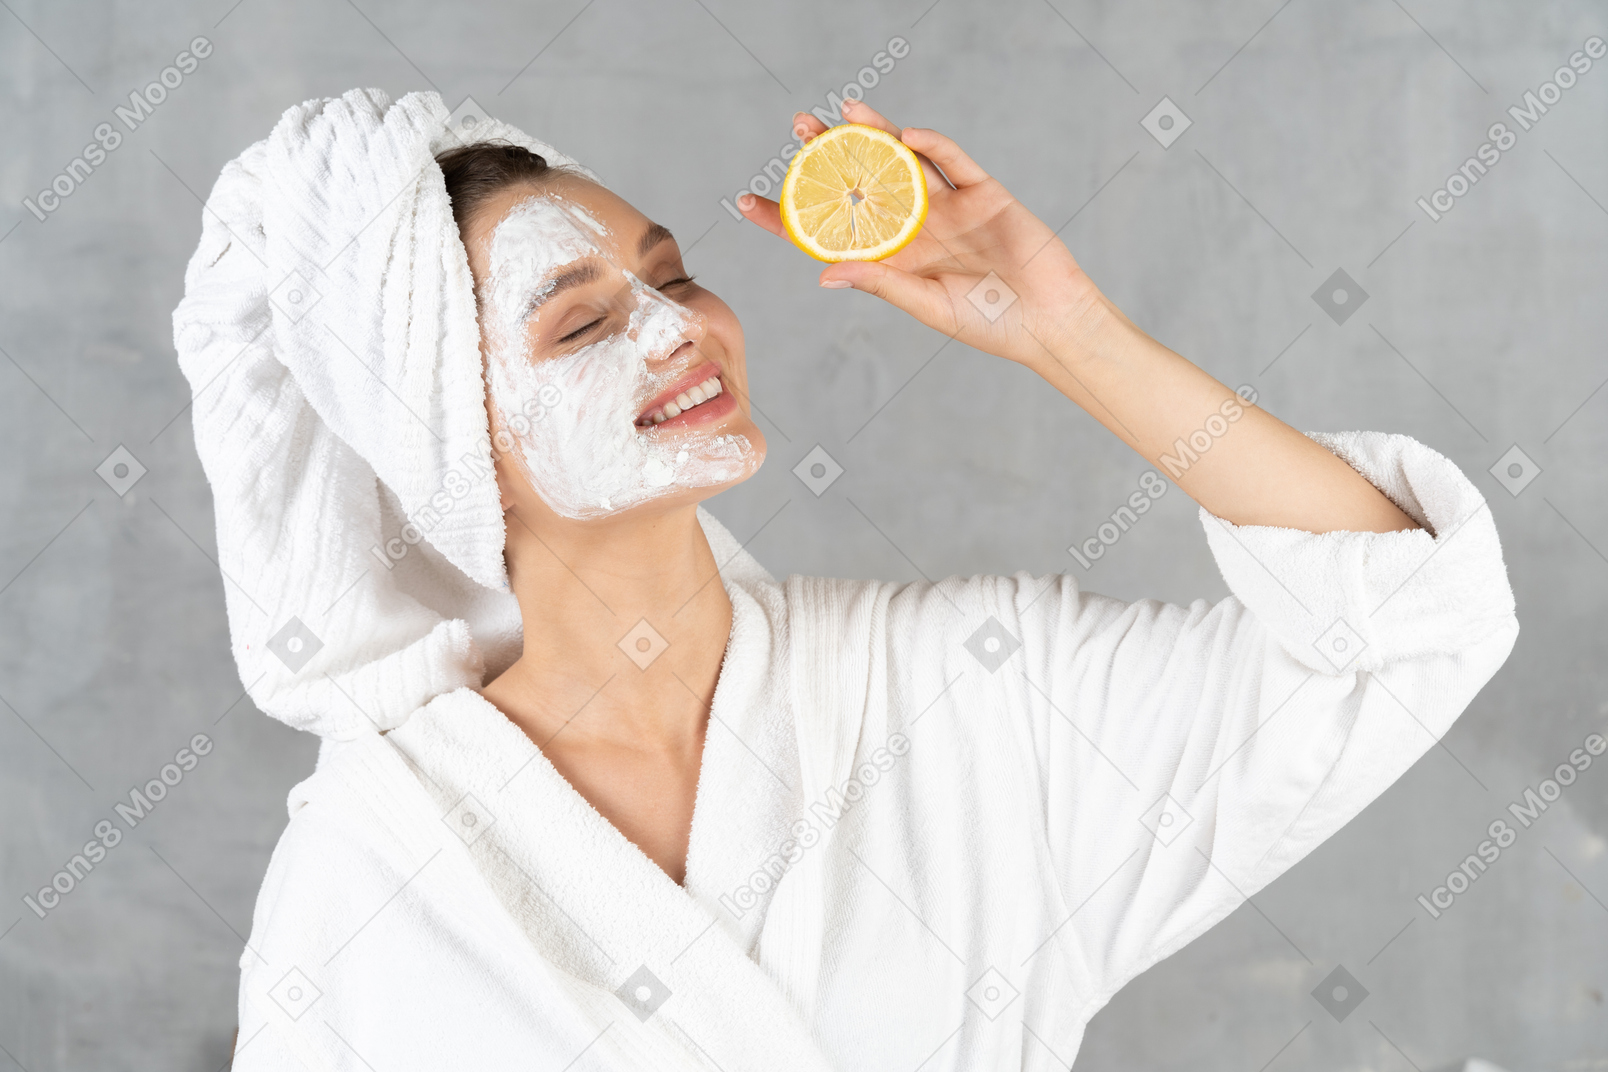 Close-up of a smiling woman in bathrobe holding a lemon